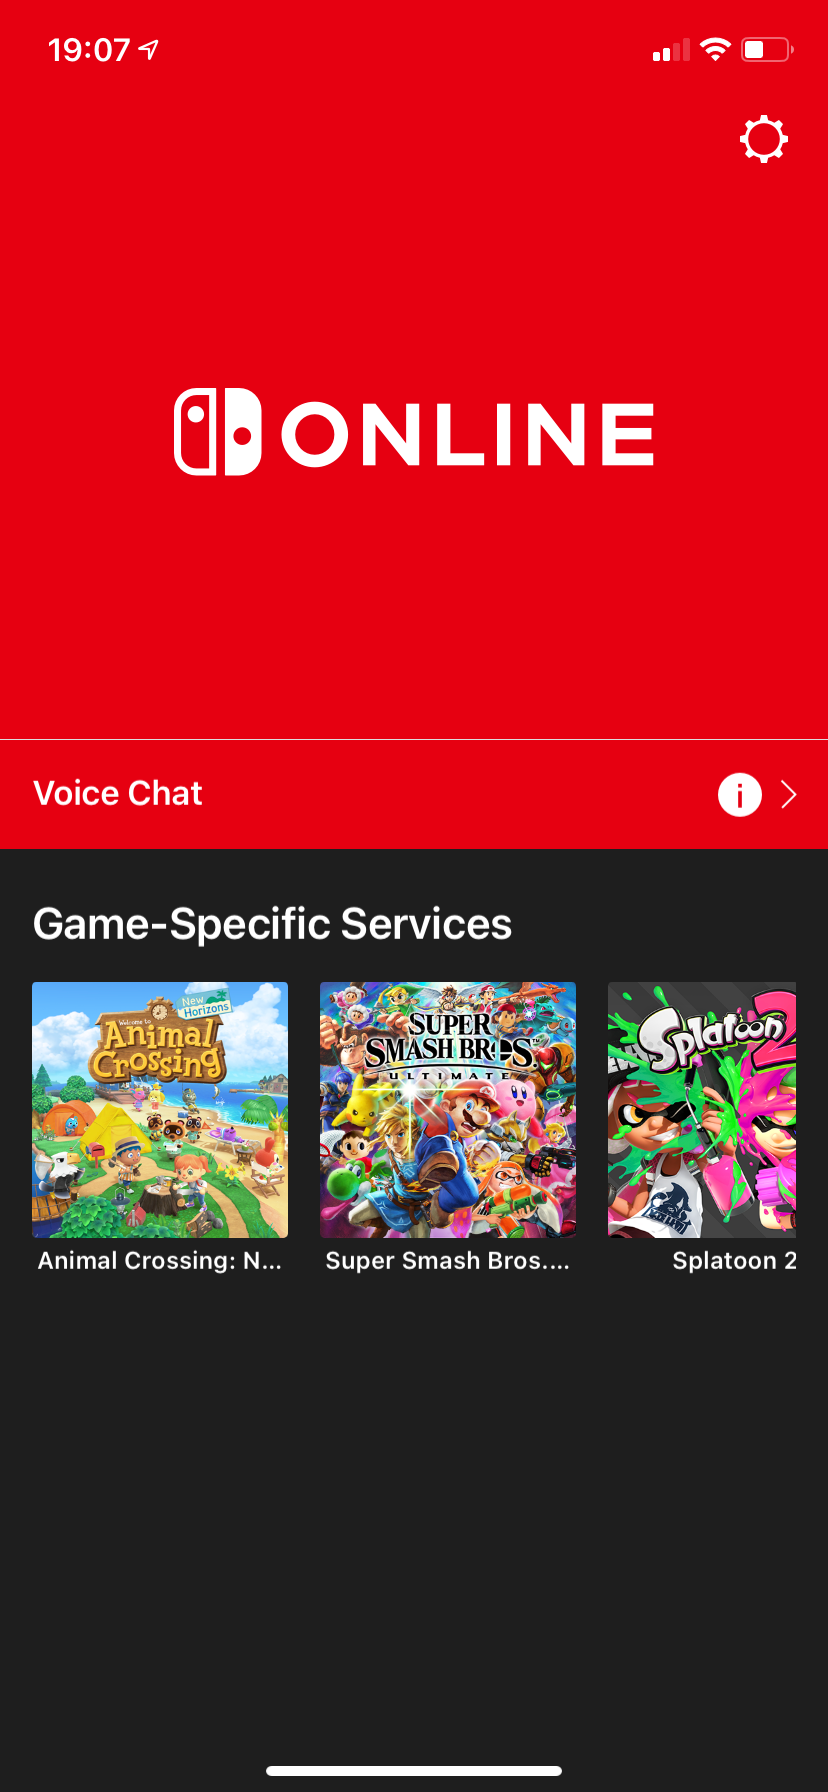 What Is Nintendo Switch Online? Everything You Need to Know